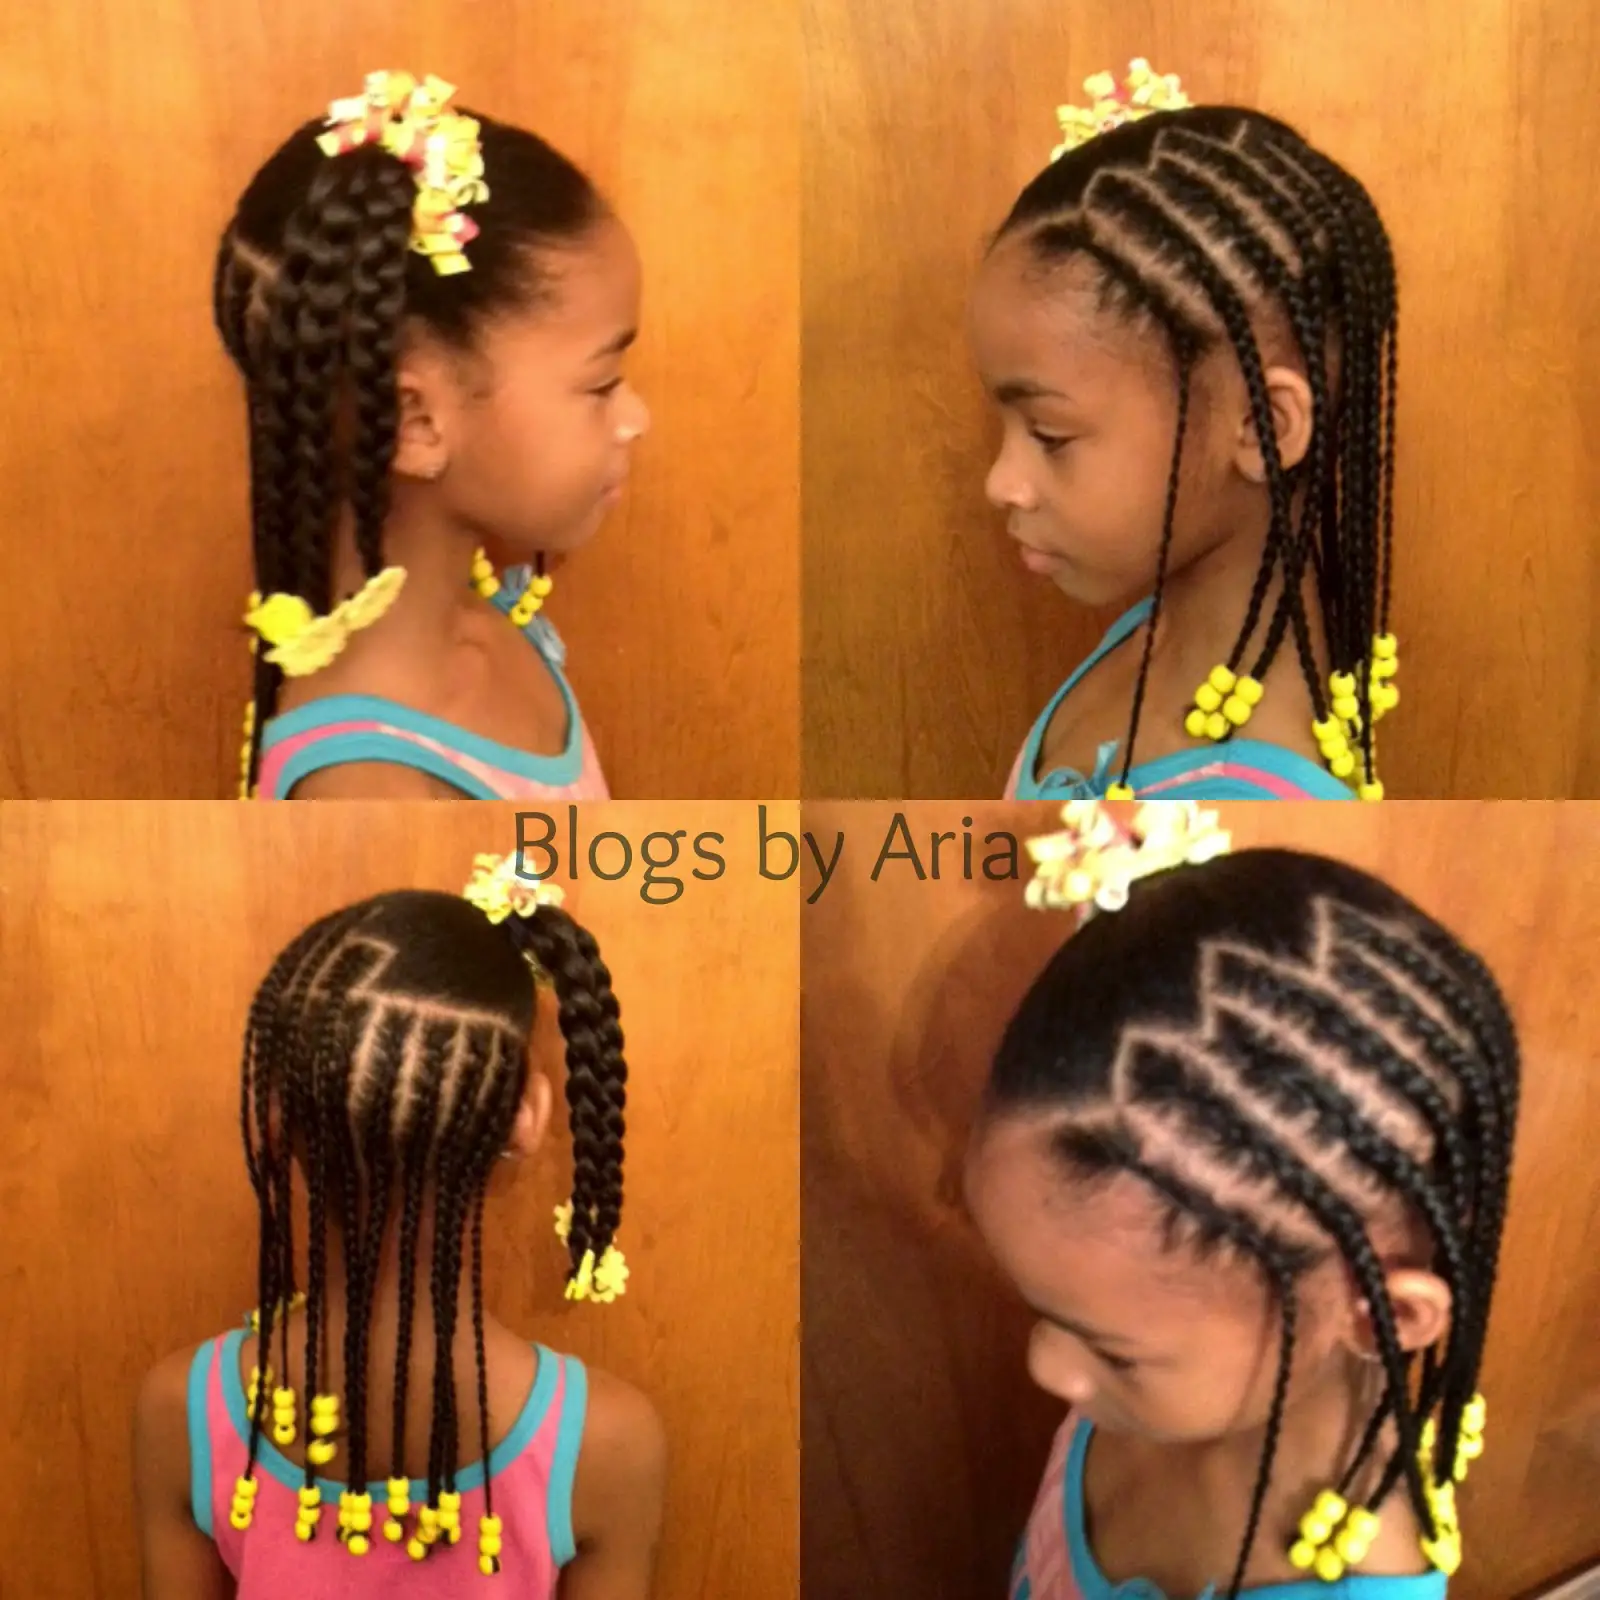 yellow beads and bows in this simple young girls hairstyle that's very cute!